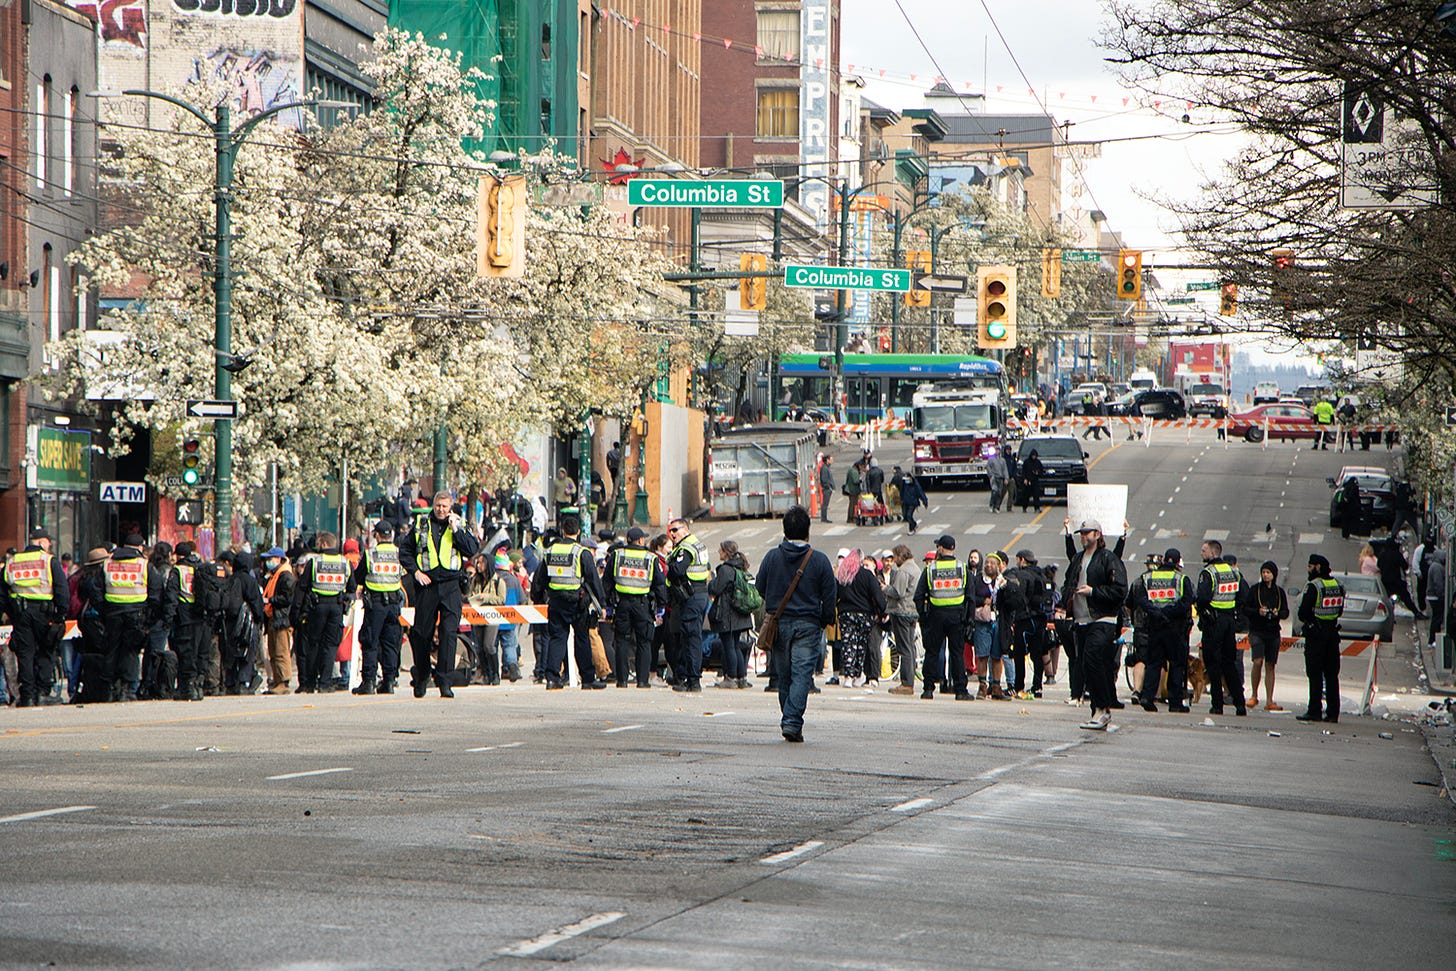 A photo from the end of the April 5 decampment and protest. A line of police are still seen holding back the protesters but the streets are already empty and the garbage trucks and city crews have already packed up and left.